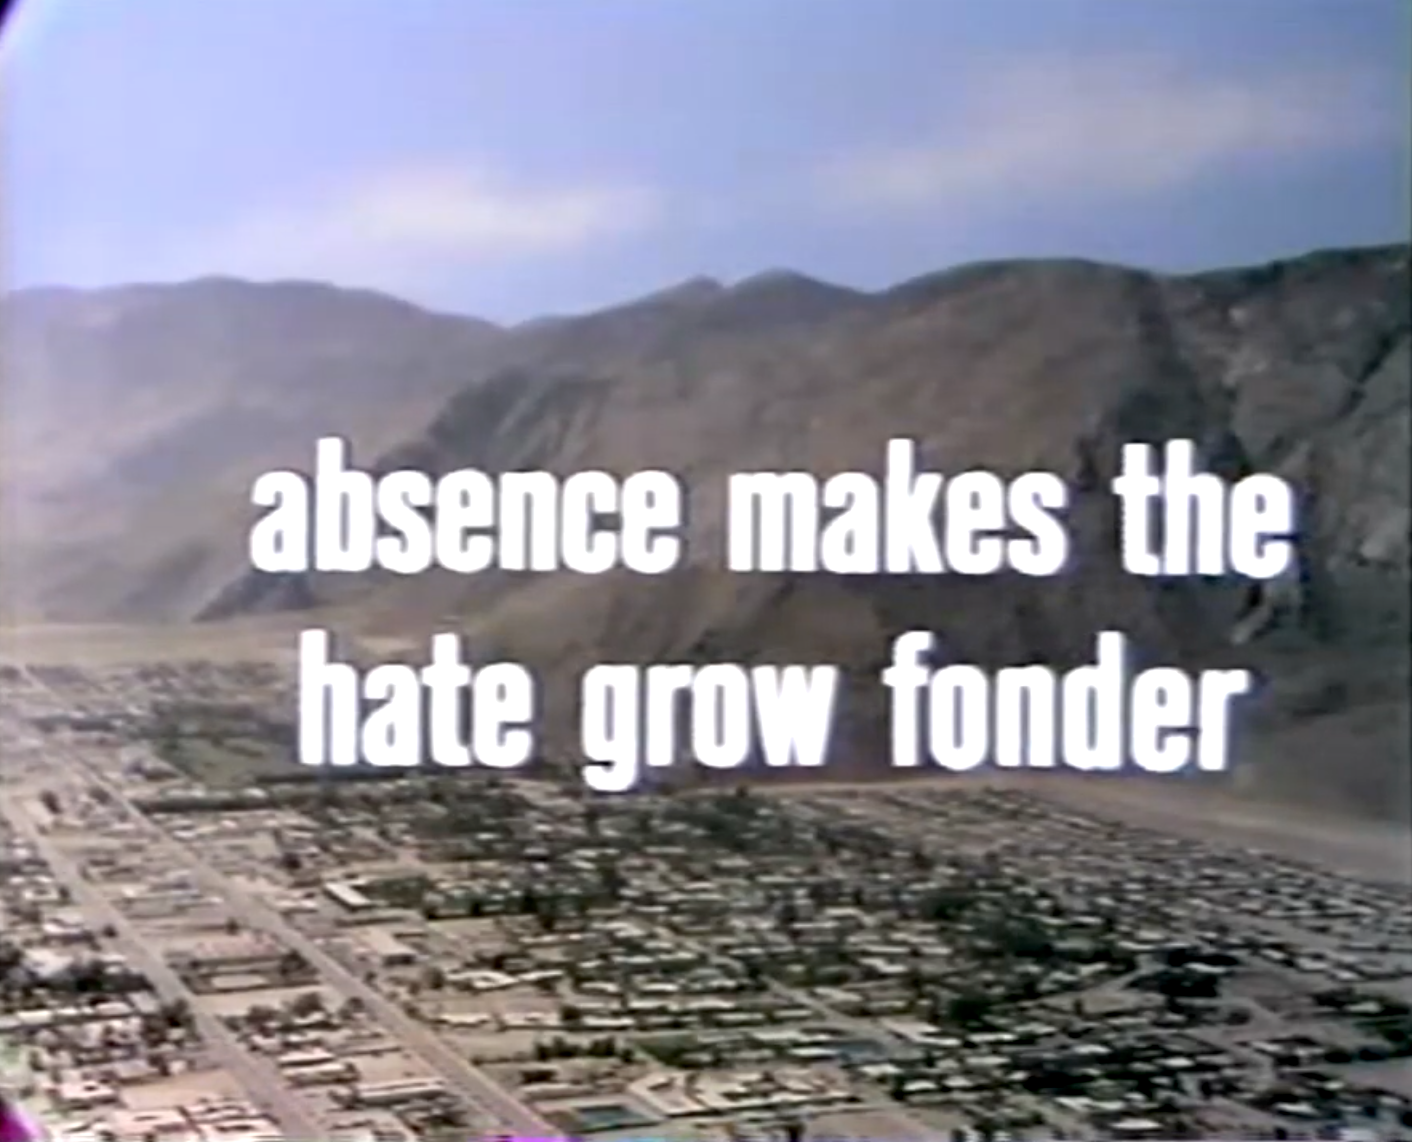 Absence Makes the Hate Grow Fonder - with Eve Arden- The Red Skelton Hour, season 16, originally aired January 24, 1967